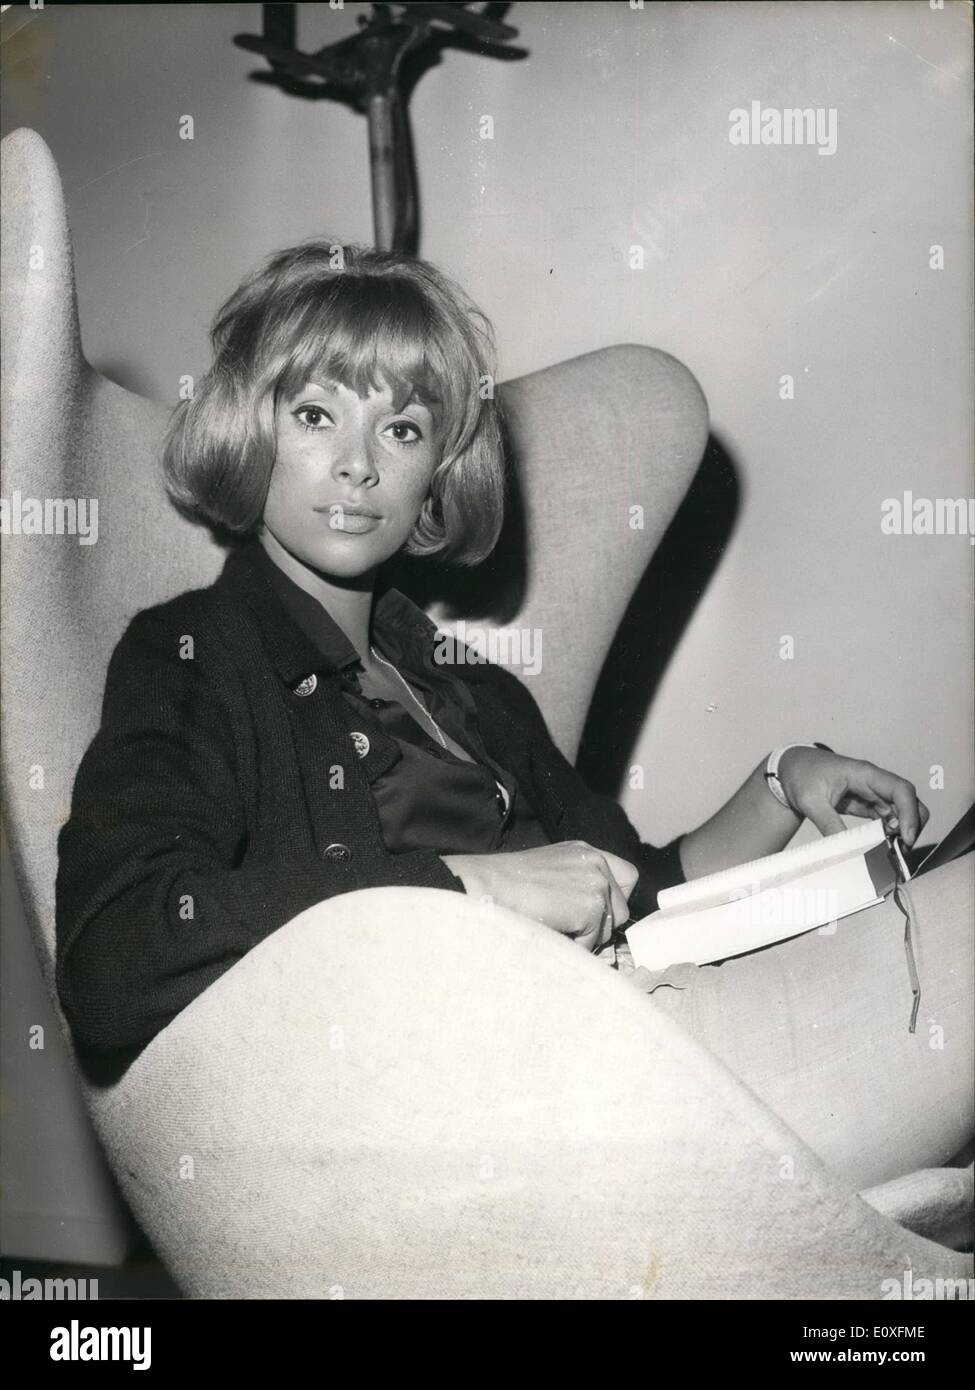 Sep. 09, 1966 - Mireille Darc Back From Lebanon.: Mireille Darc, the coming French Screen actress, who is starring in the film ''La Suaterlie'' (The Locust) is back in Paris after filming in Lebanon. Photo shows Mireille Darc in a scene of the film made in Paris. Stock Photo